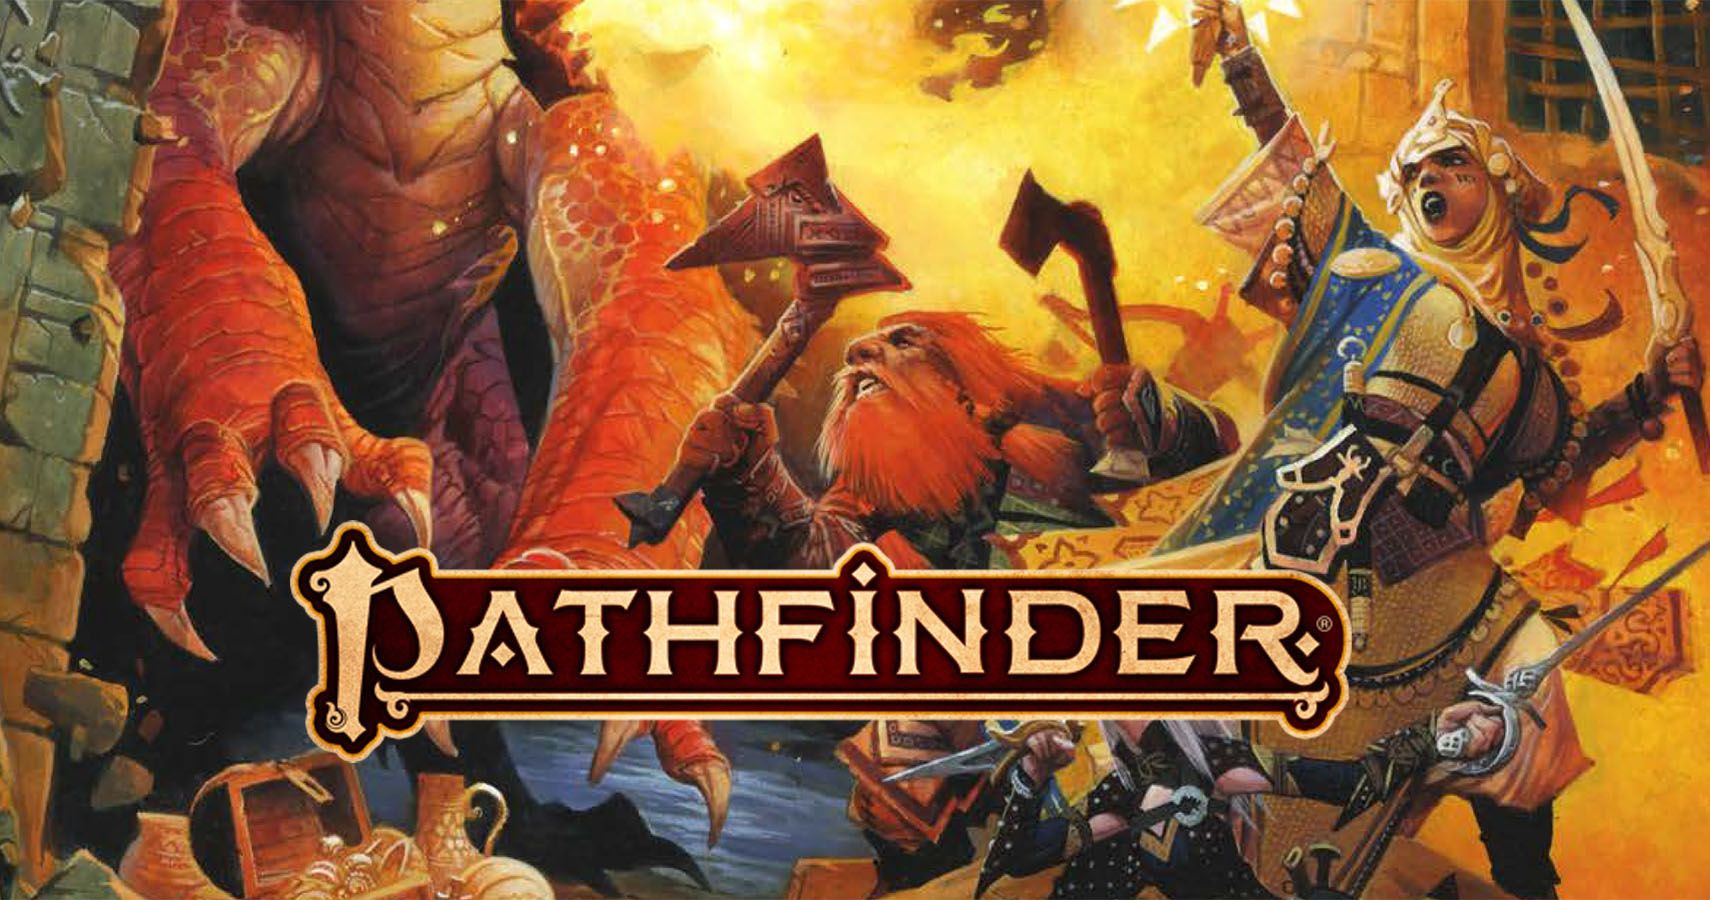 Play Pathfinder Second Edition If You Want More Customizability In Your D&D